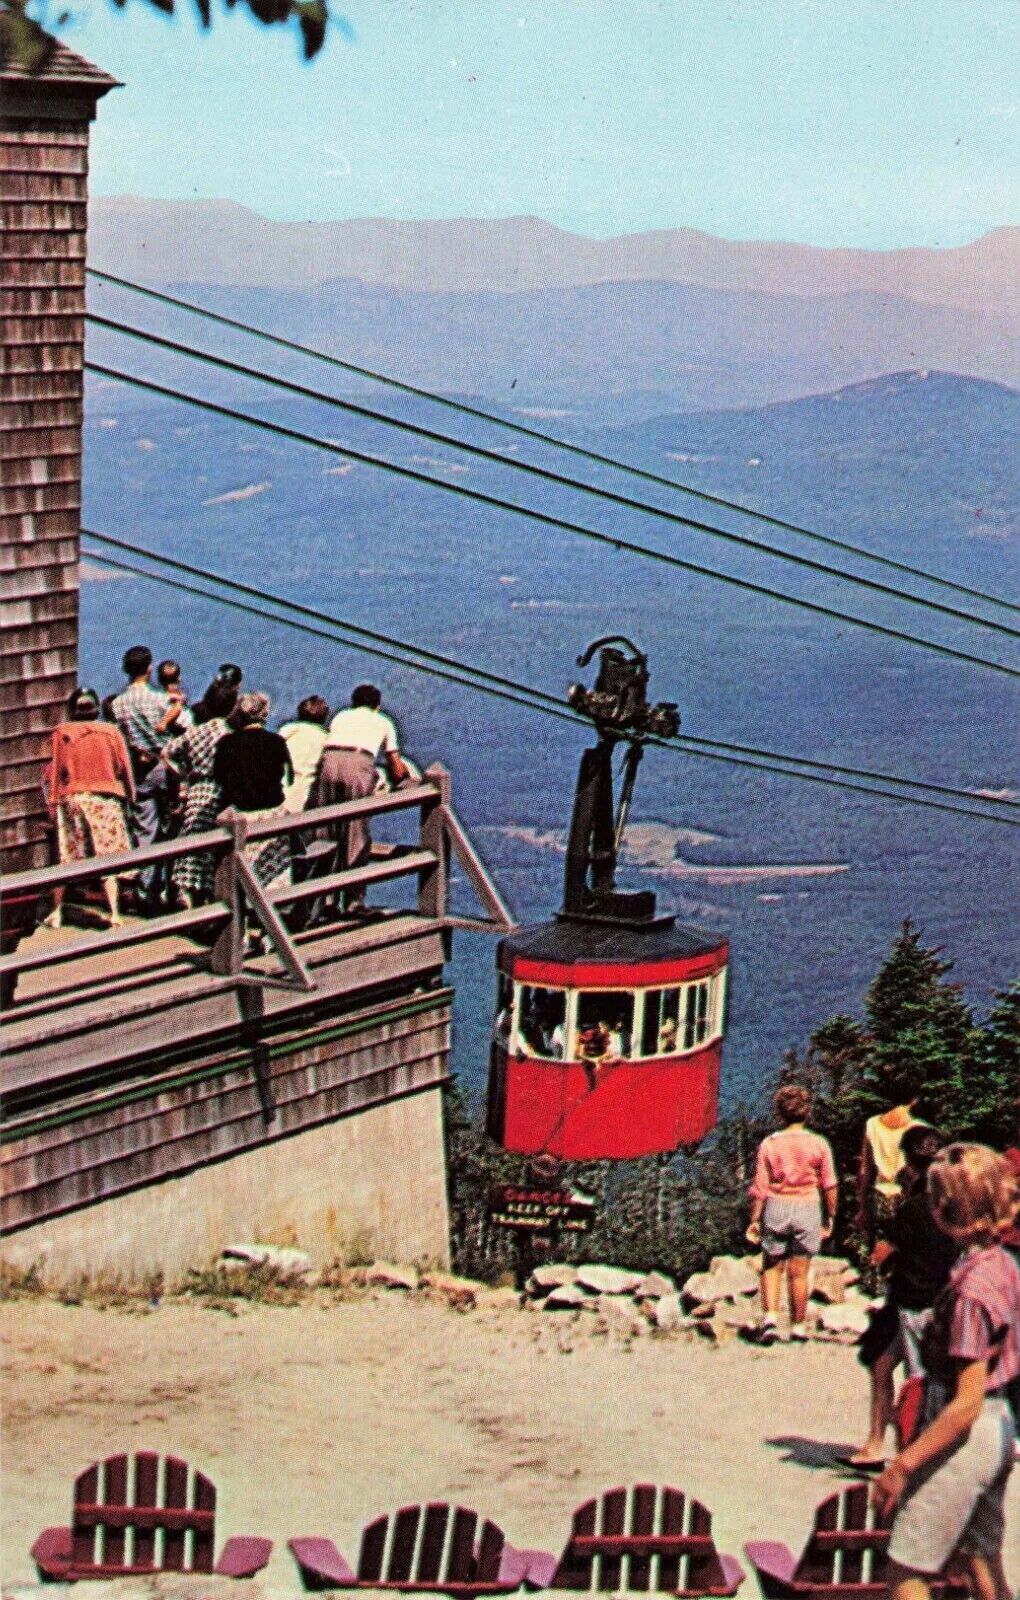 Cannon Mountain Aerial Tramway Tram-Car - Franconia Notch New Hampshire Postcard